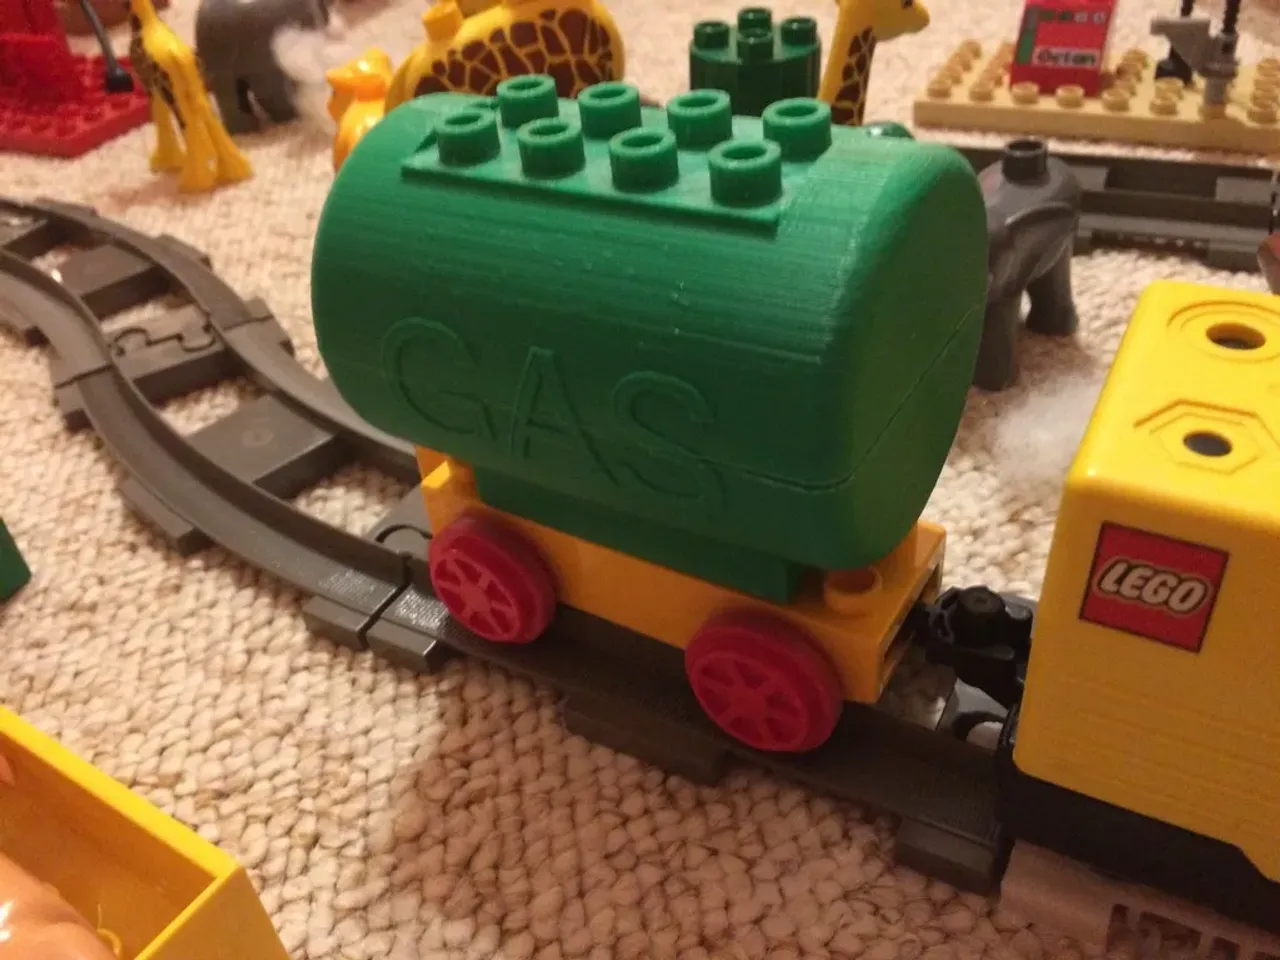 Lego Duplo train specials -- smaller tanks by smuk3d